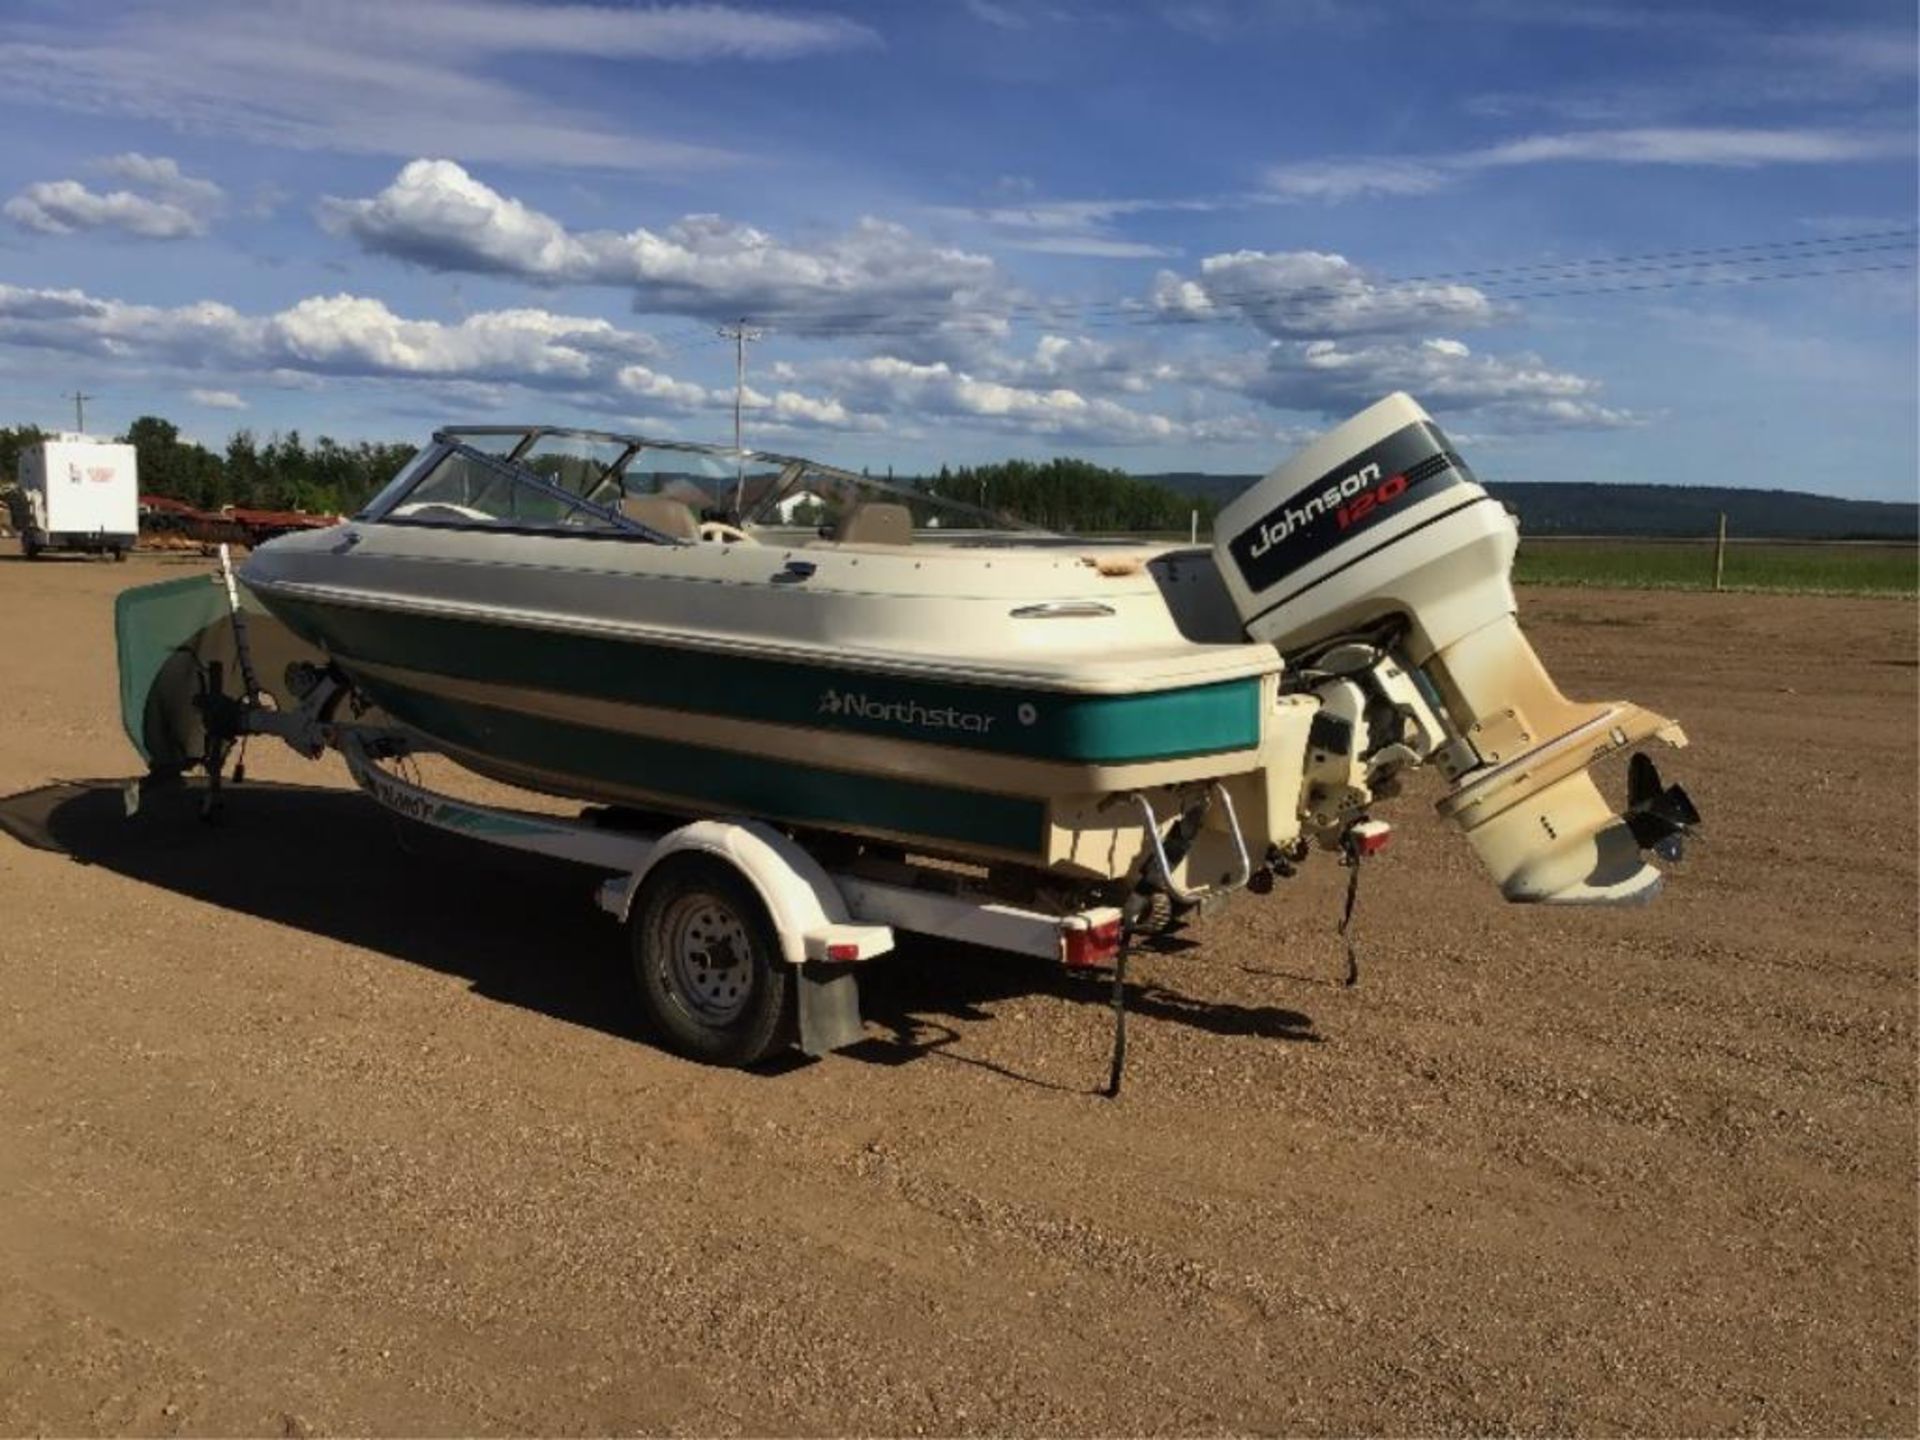 1995 Northstar 17Ft Fibreglass Boat & Shoreland'rr w/Johnson 120 Outboard Kicker s/n G 03229019 This - Image 3 of 11